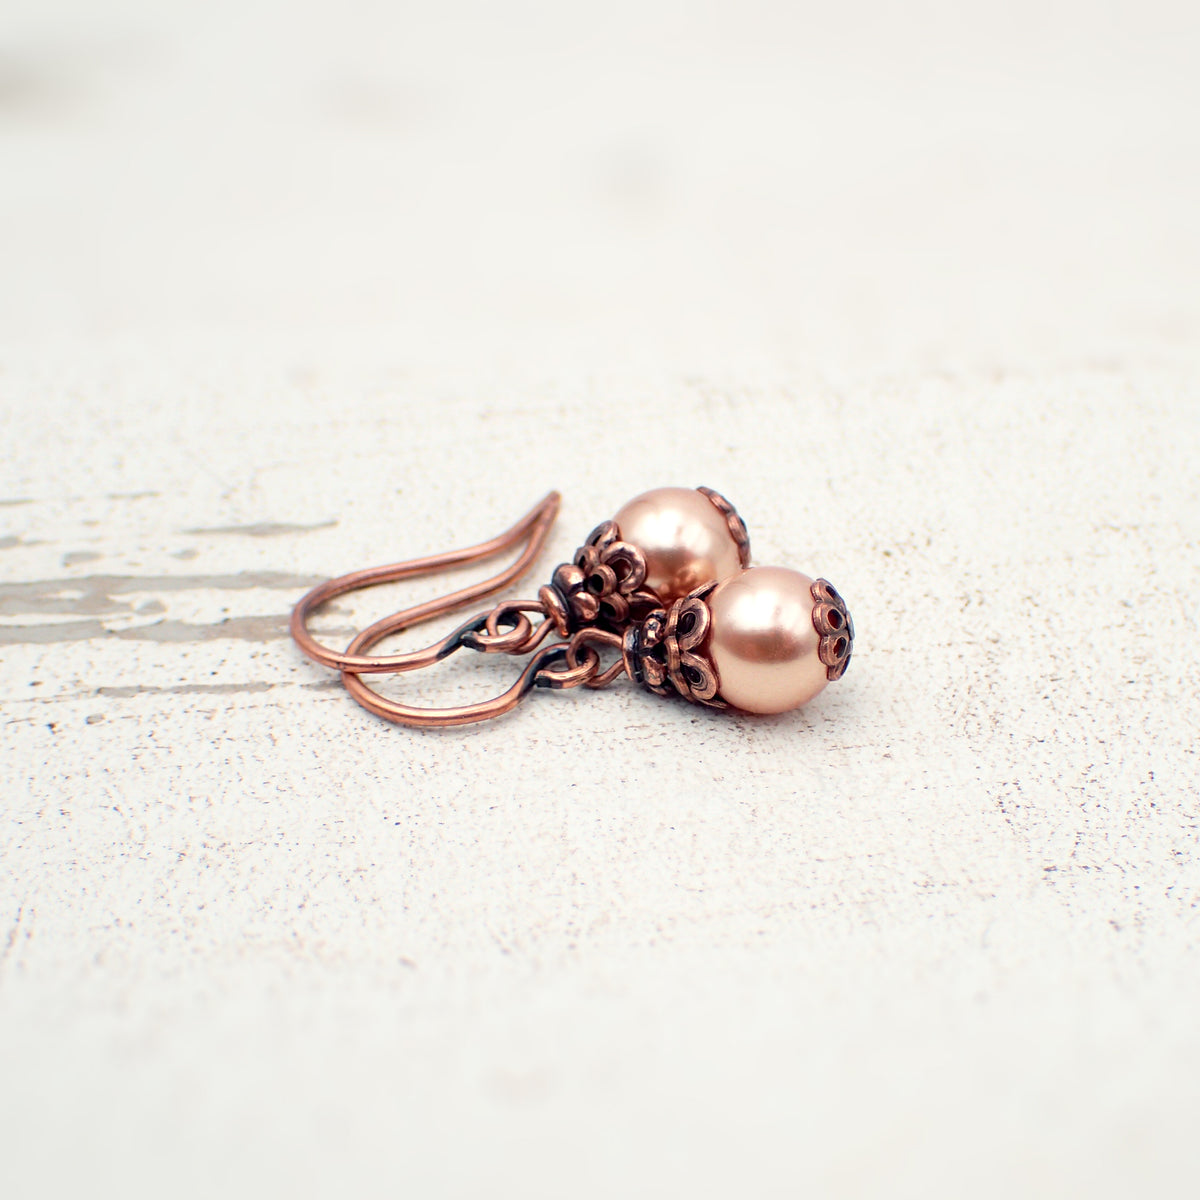 Dainty Copper Filigree Earrings with Rose Gold Pearls - Ardent Hearts